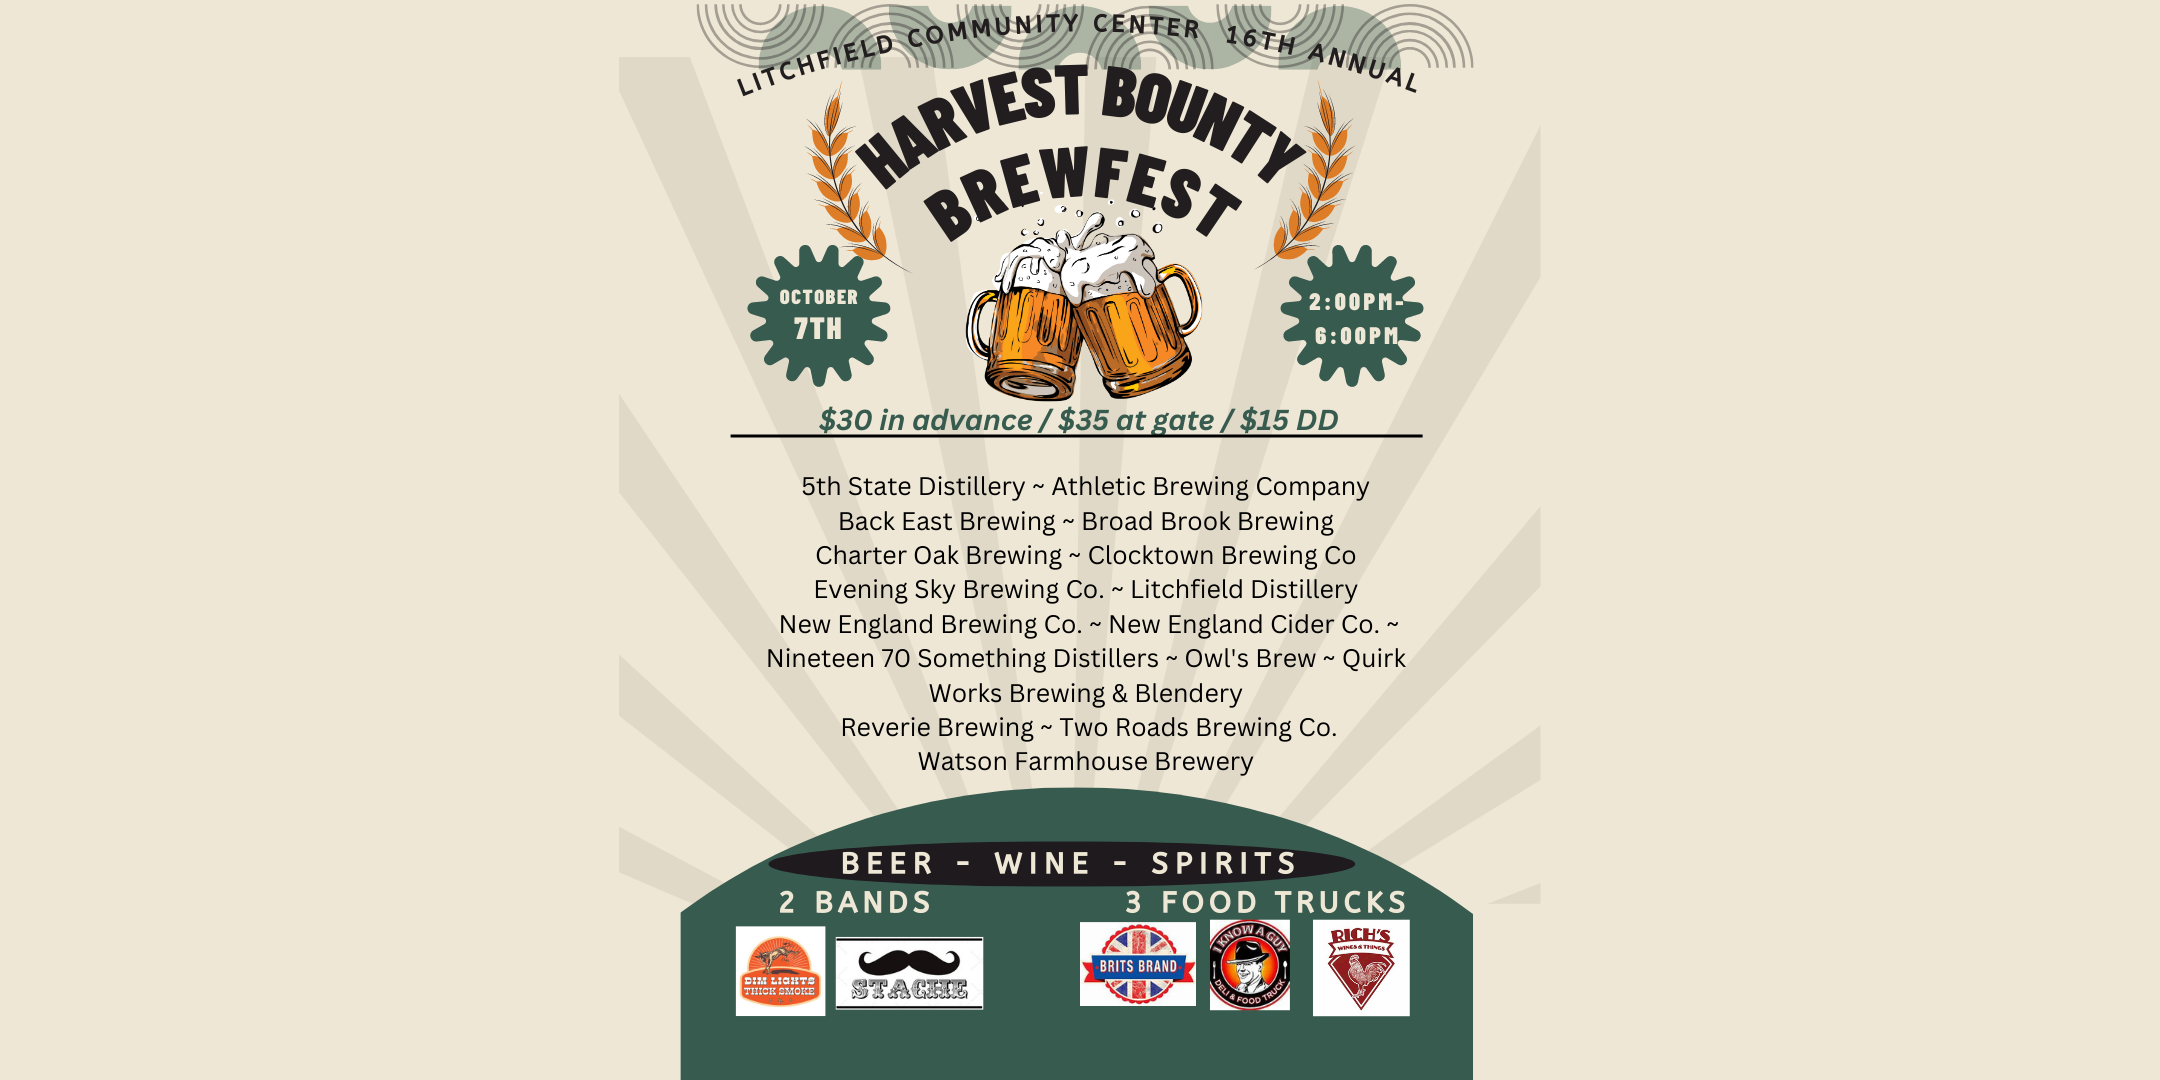 16th Annual Harvest Bounty BrewFest banner image